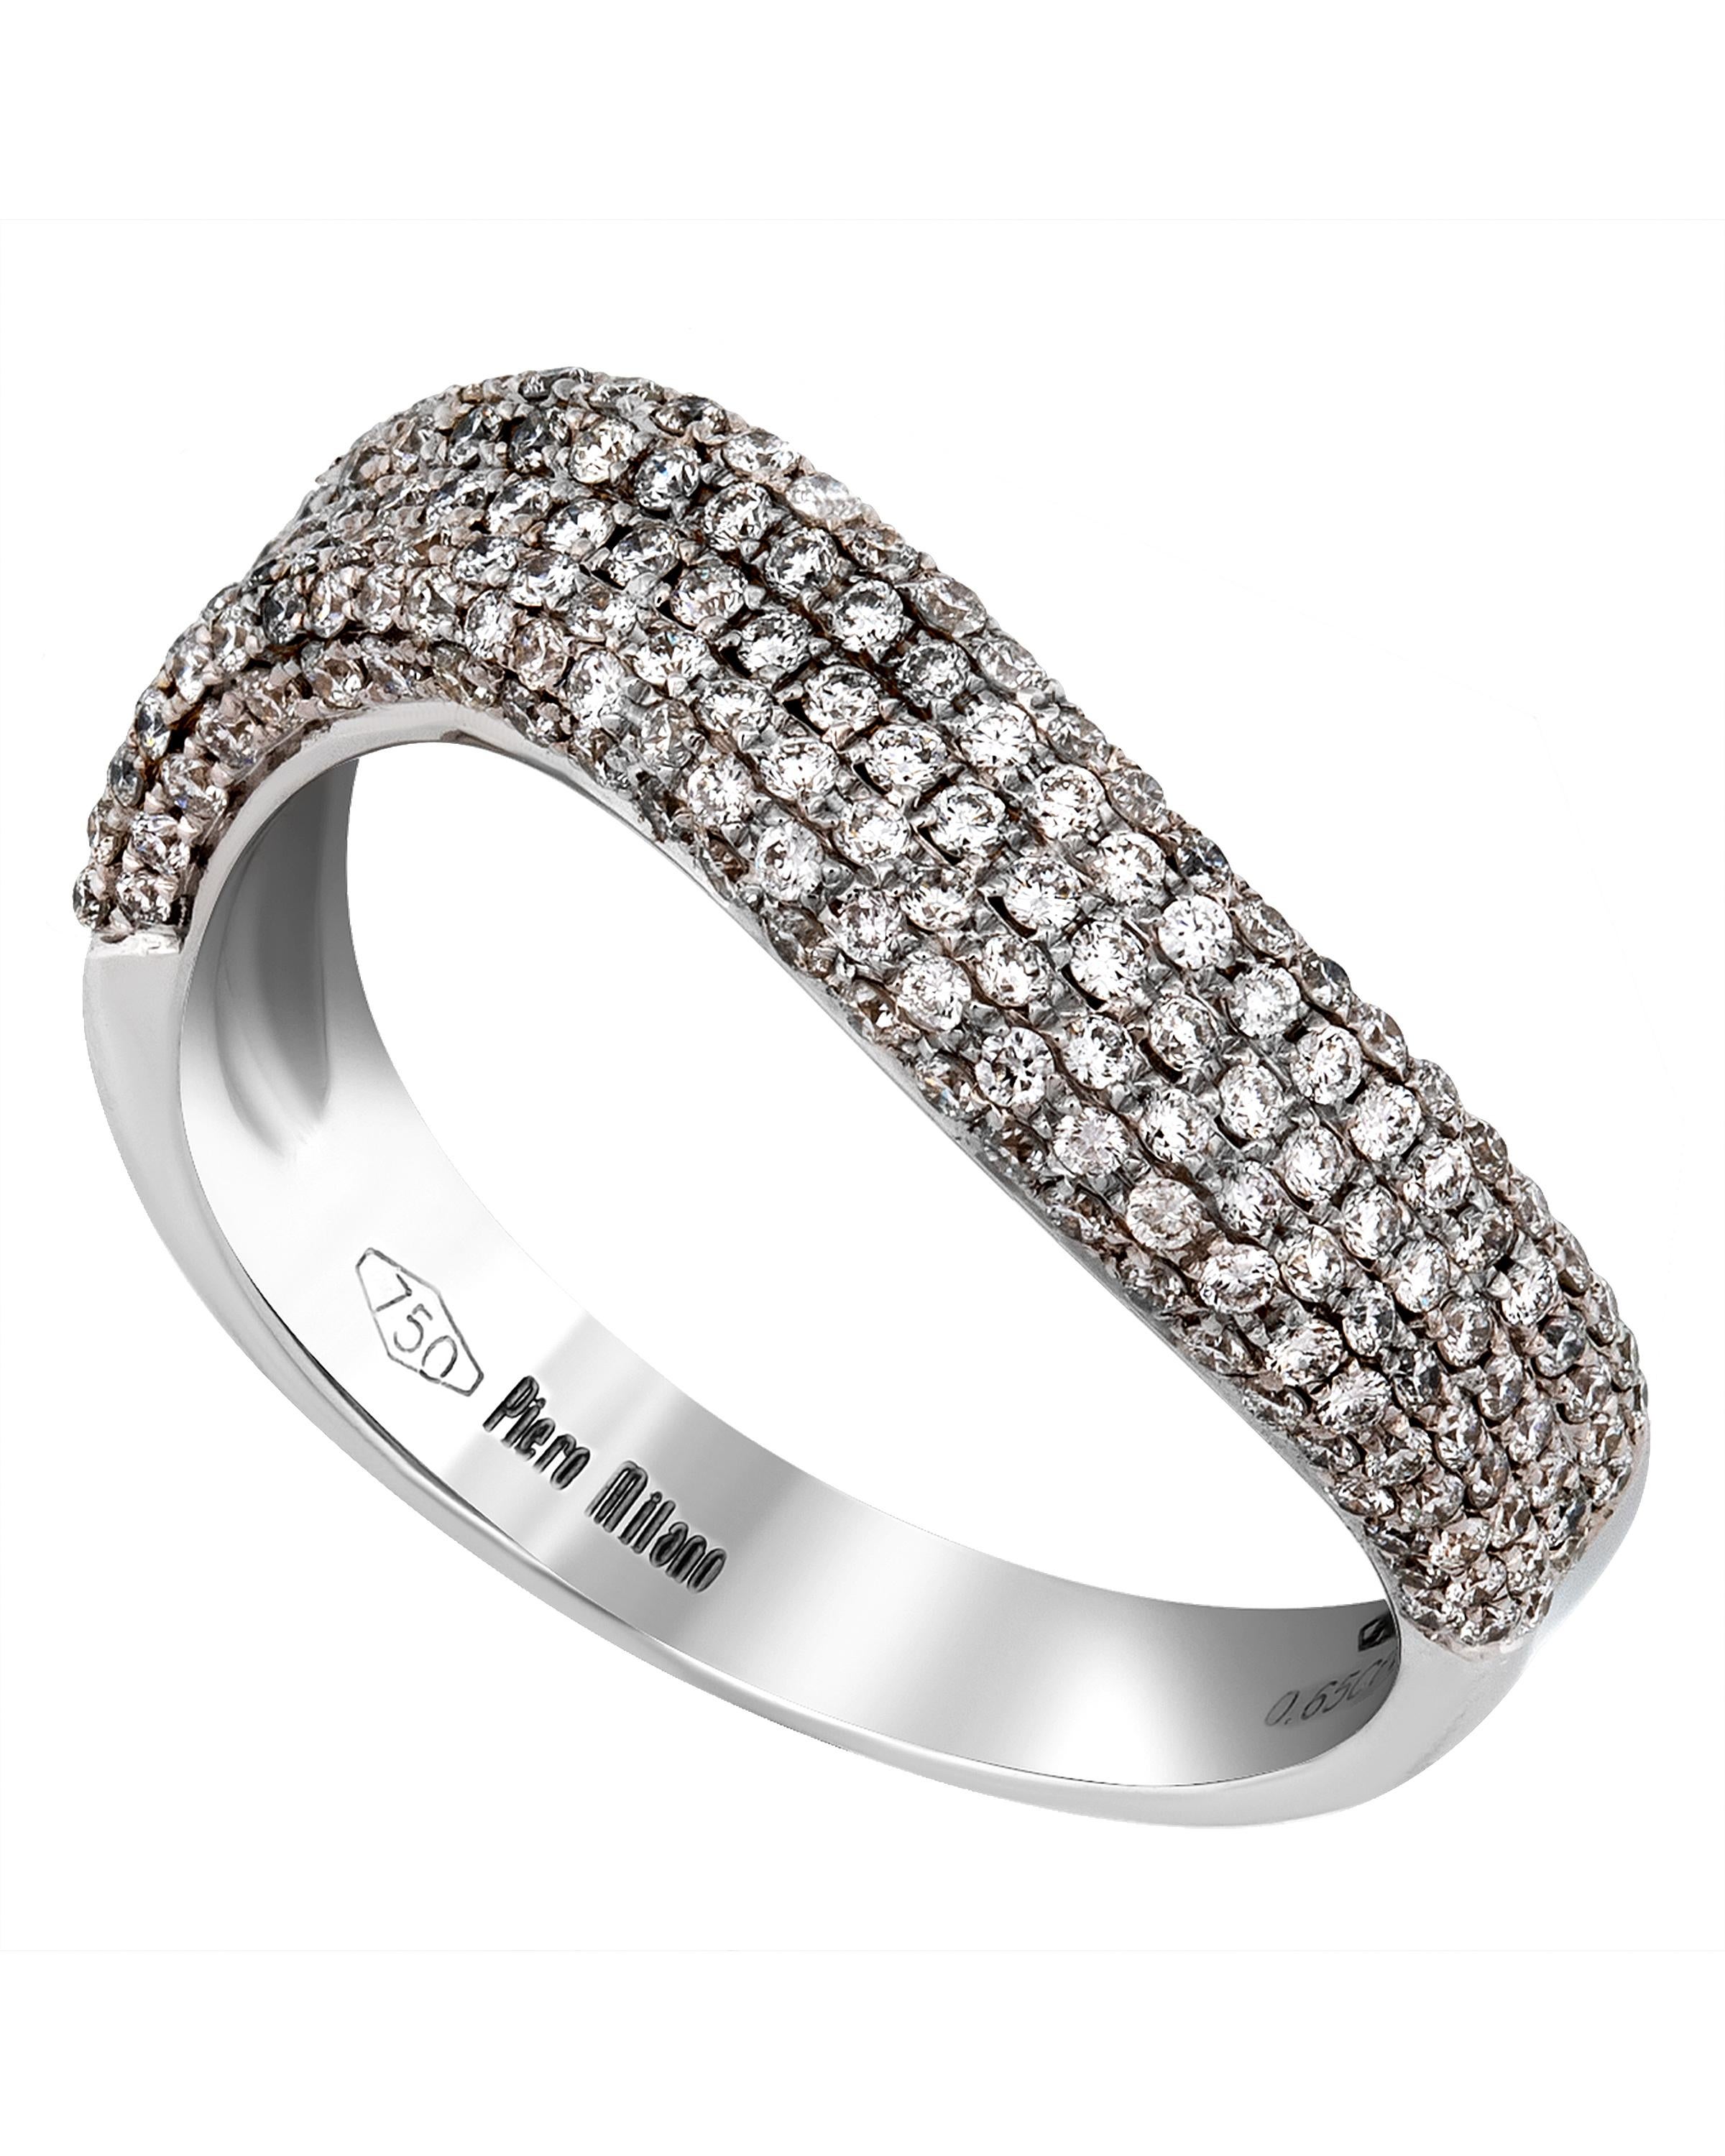 This contemporary Piero Milano 18K White Gold Curved Ring features layers of striking diamonds 0.65ct. tw. lining a curved white gold band. The ring size is 6.5 (53.1). The Band Width is 4.5mm. The Weight is 4.2g.
